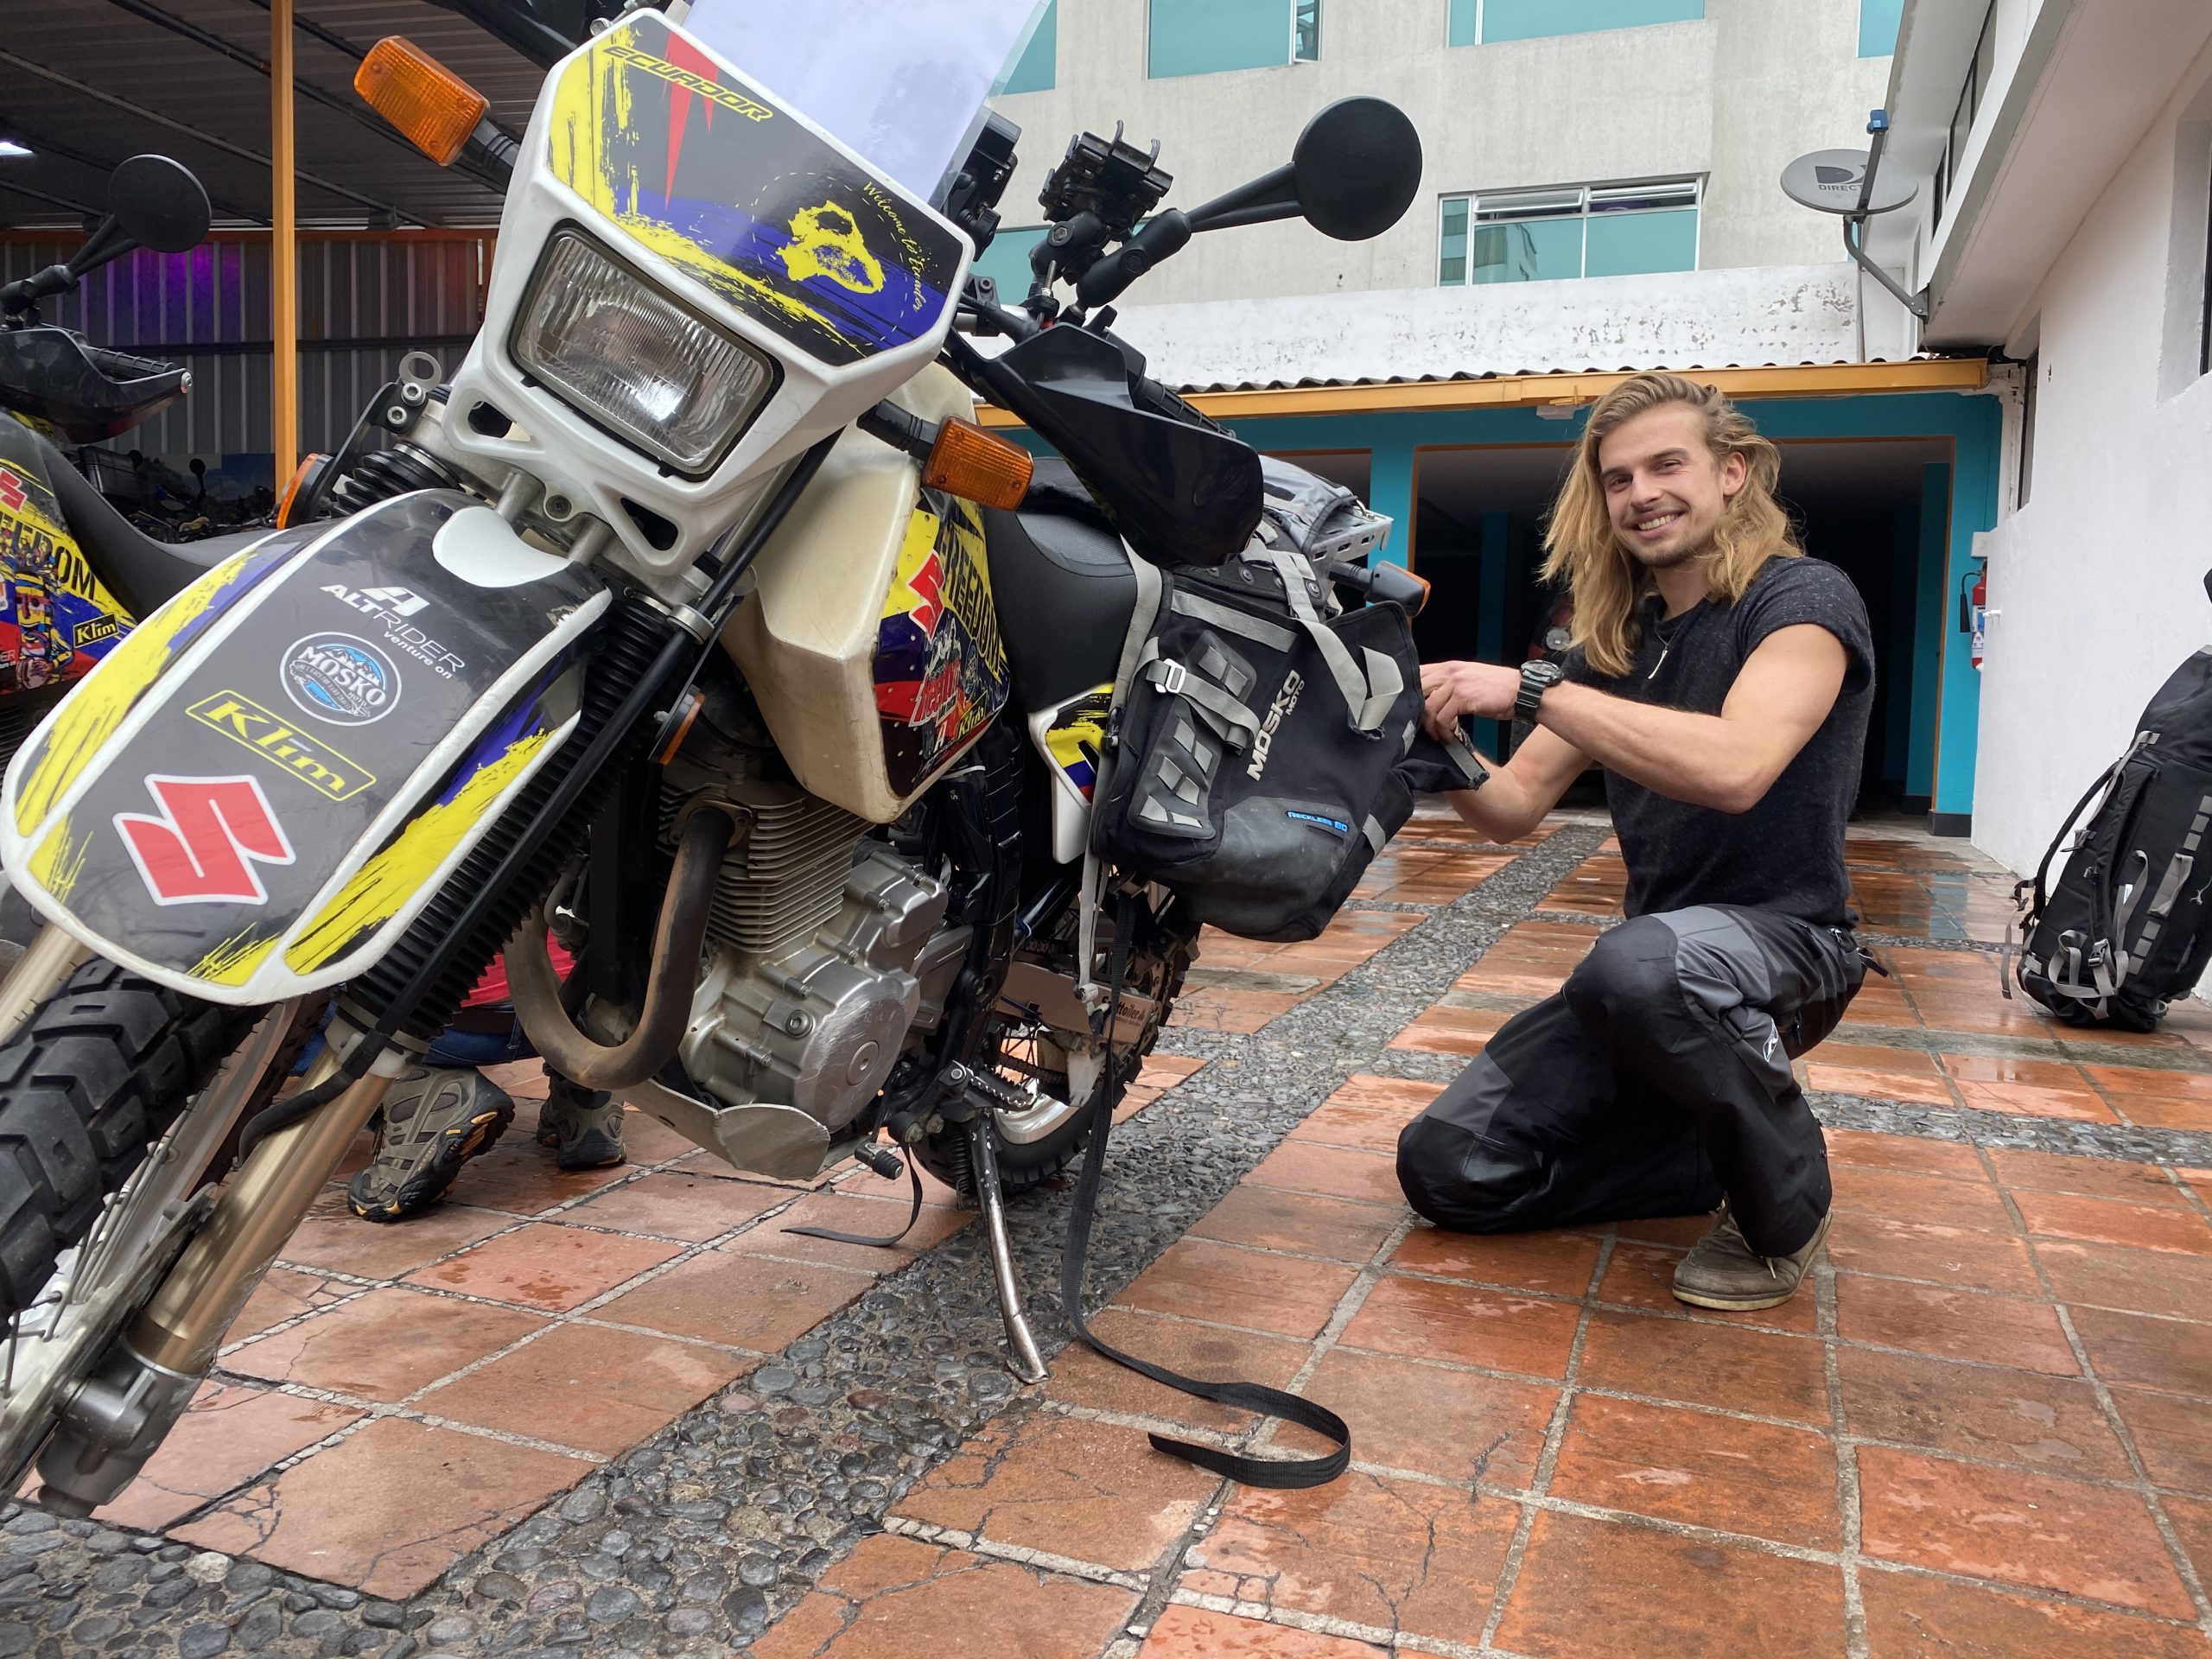 Motorcycle Ecuador: The Backroads and Freedom // Adventure Bound